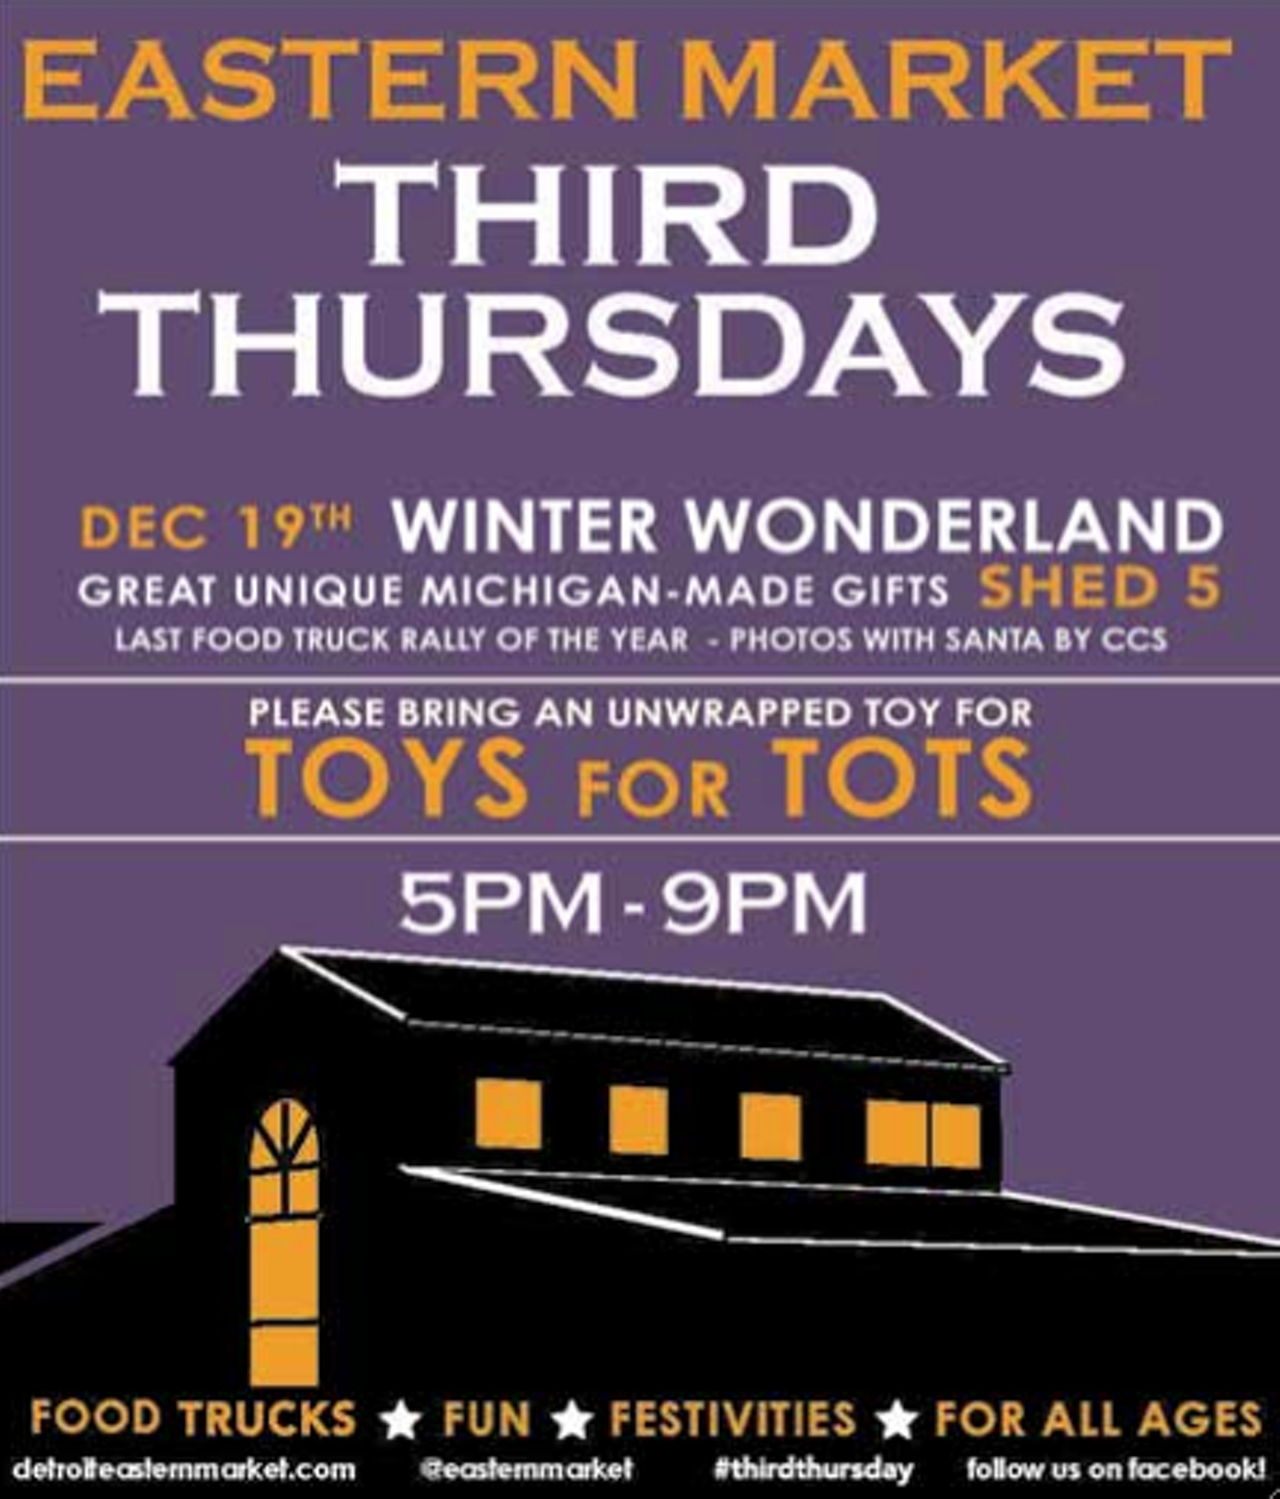 Thursday, Dec 19
Third Thursdays at Eastern Market:
Great Michigan-made gifts in Shed 5. Also features the last food truck rally of the year and photos with Santa. Also collecting toys for Toys for Tots. Fun for all ages!
Eastern Market
2934 Russell St, Detroit, MI 48207
(313) 833-9300
5 p.m.-9 p.m.